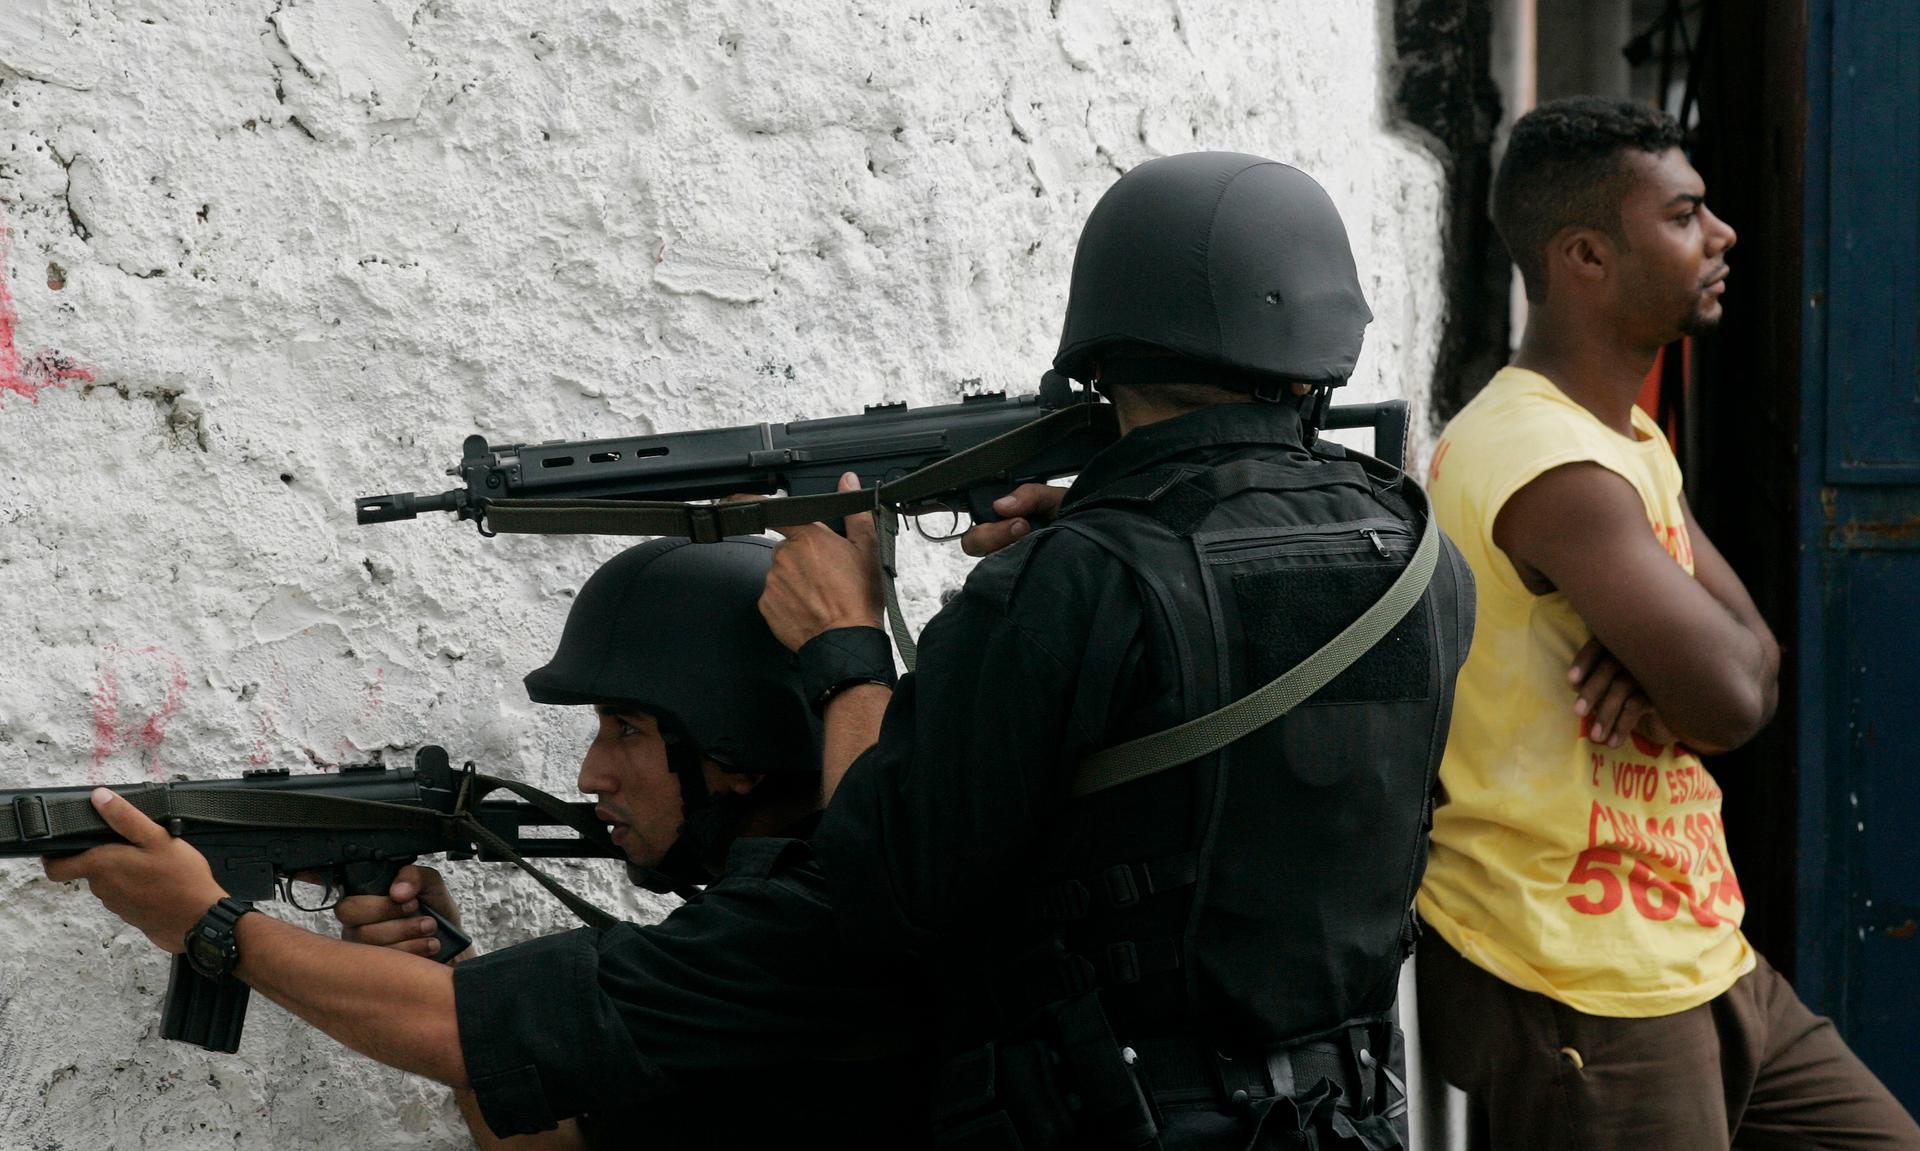 Brazilian elite police officers take aim near a resident of the Complexo do Alemao slum as they carry out raids to control the escalating violence between drug gangs, in Rio de Janeiro in 2007.